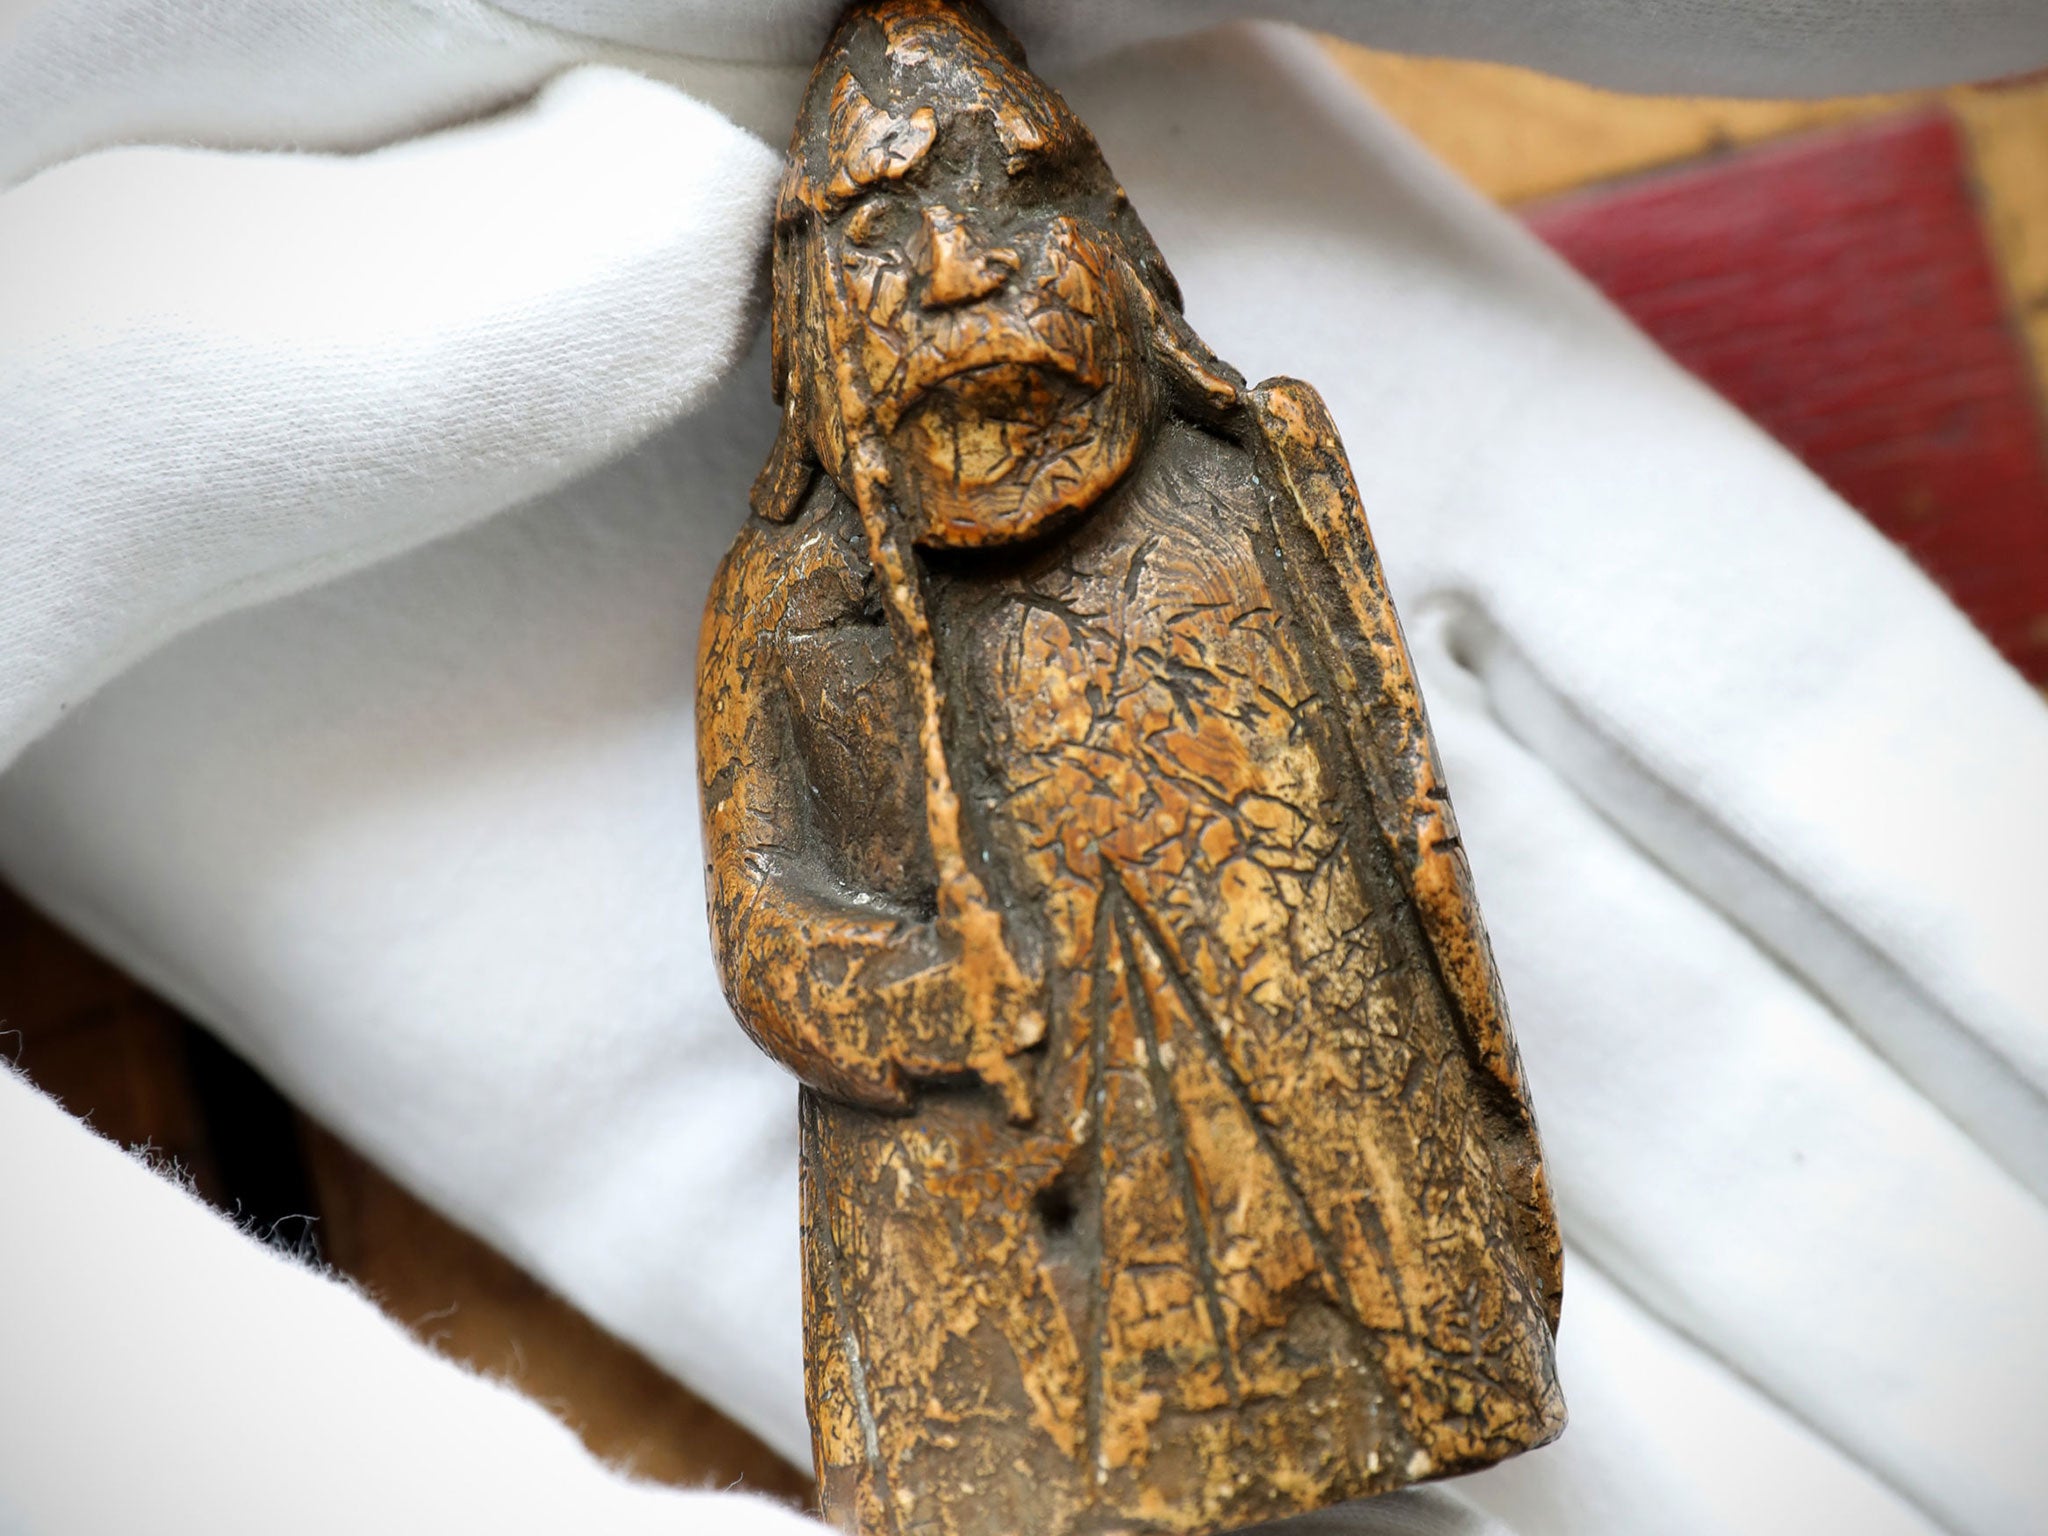 The ‘warder’ piece – equivalent to a modern-day rook – from the Lewis chessmen had been presumed lost